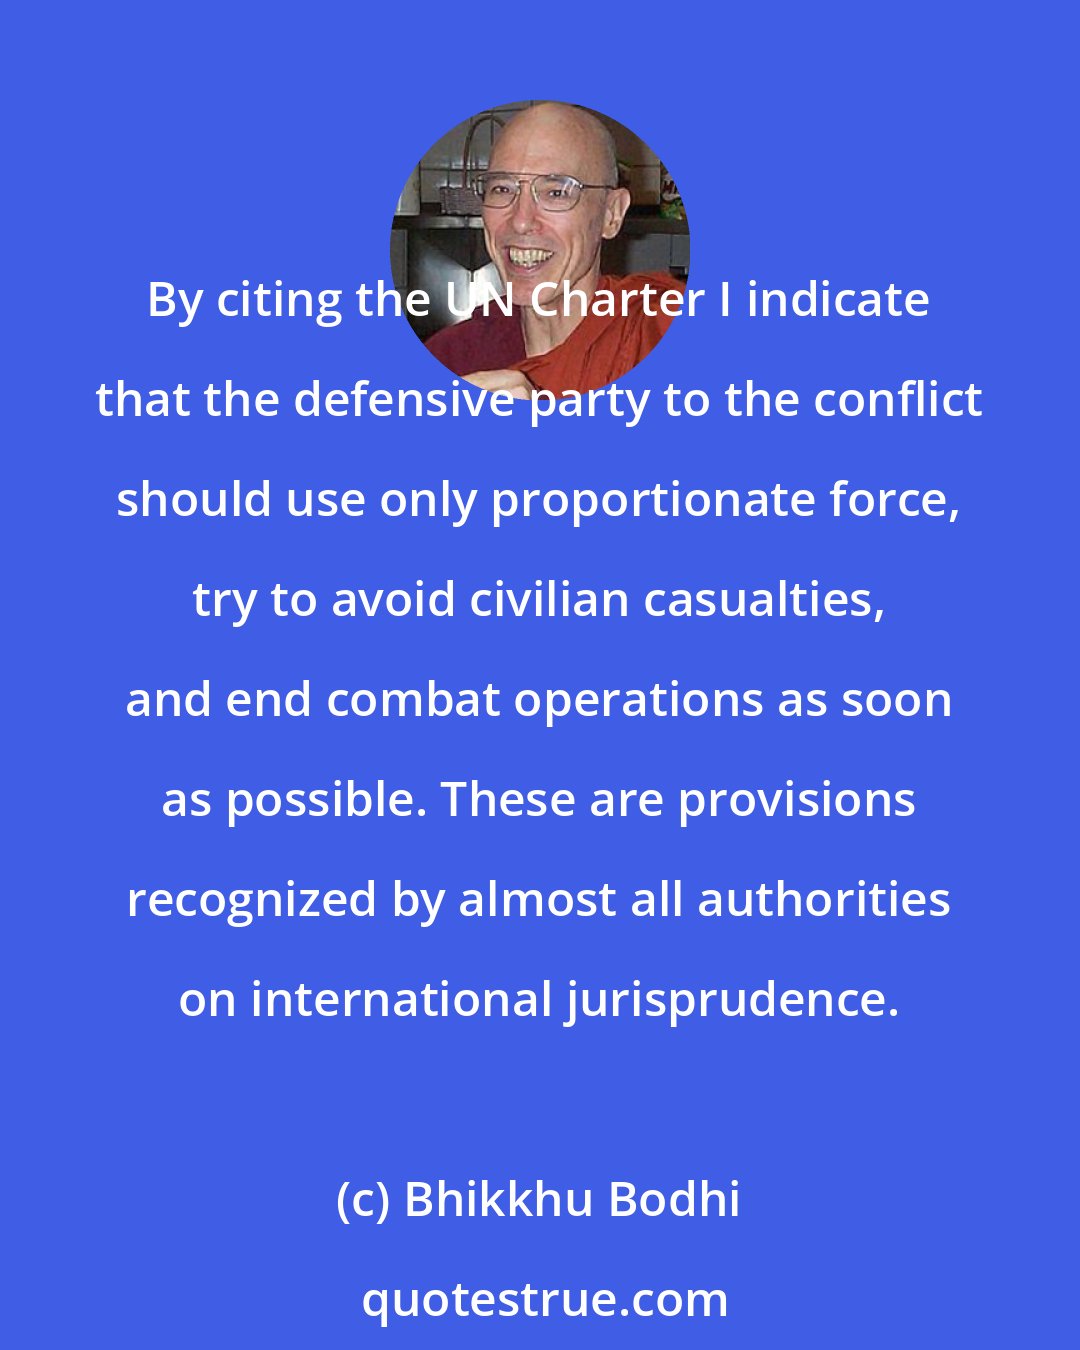 Bhikkhu Bodhi: By citing the UN Charter I indicate that the defensive party to the conflict should use only proportionate force, try to avoid civilian casualties, and end combat operations as soon as possible. These are provisions recognized by almost all authorities on international jurisprudence.